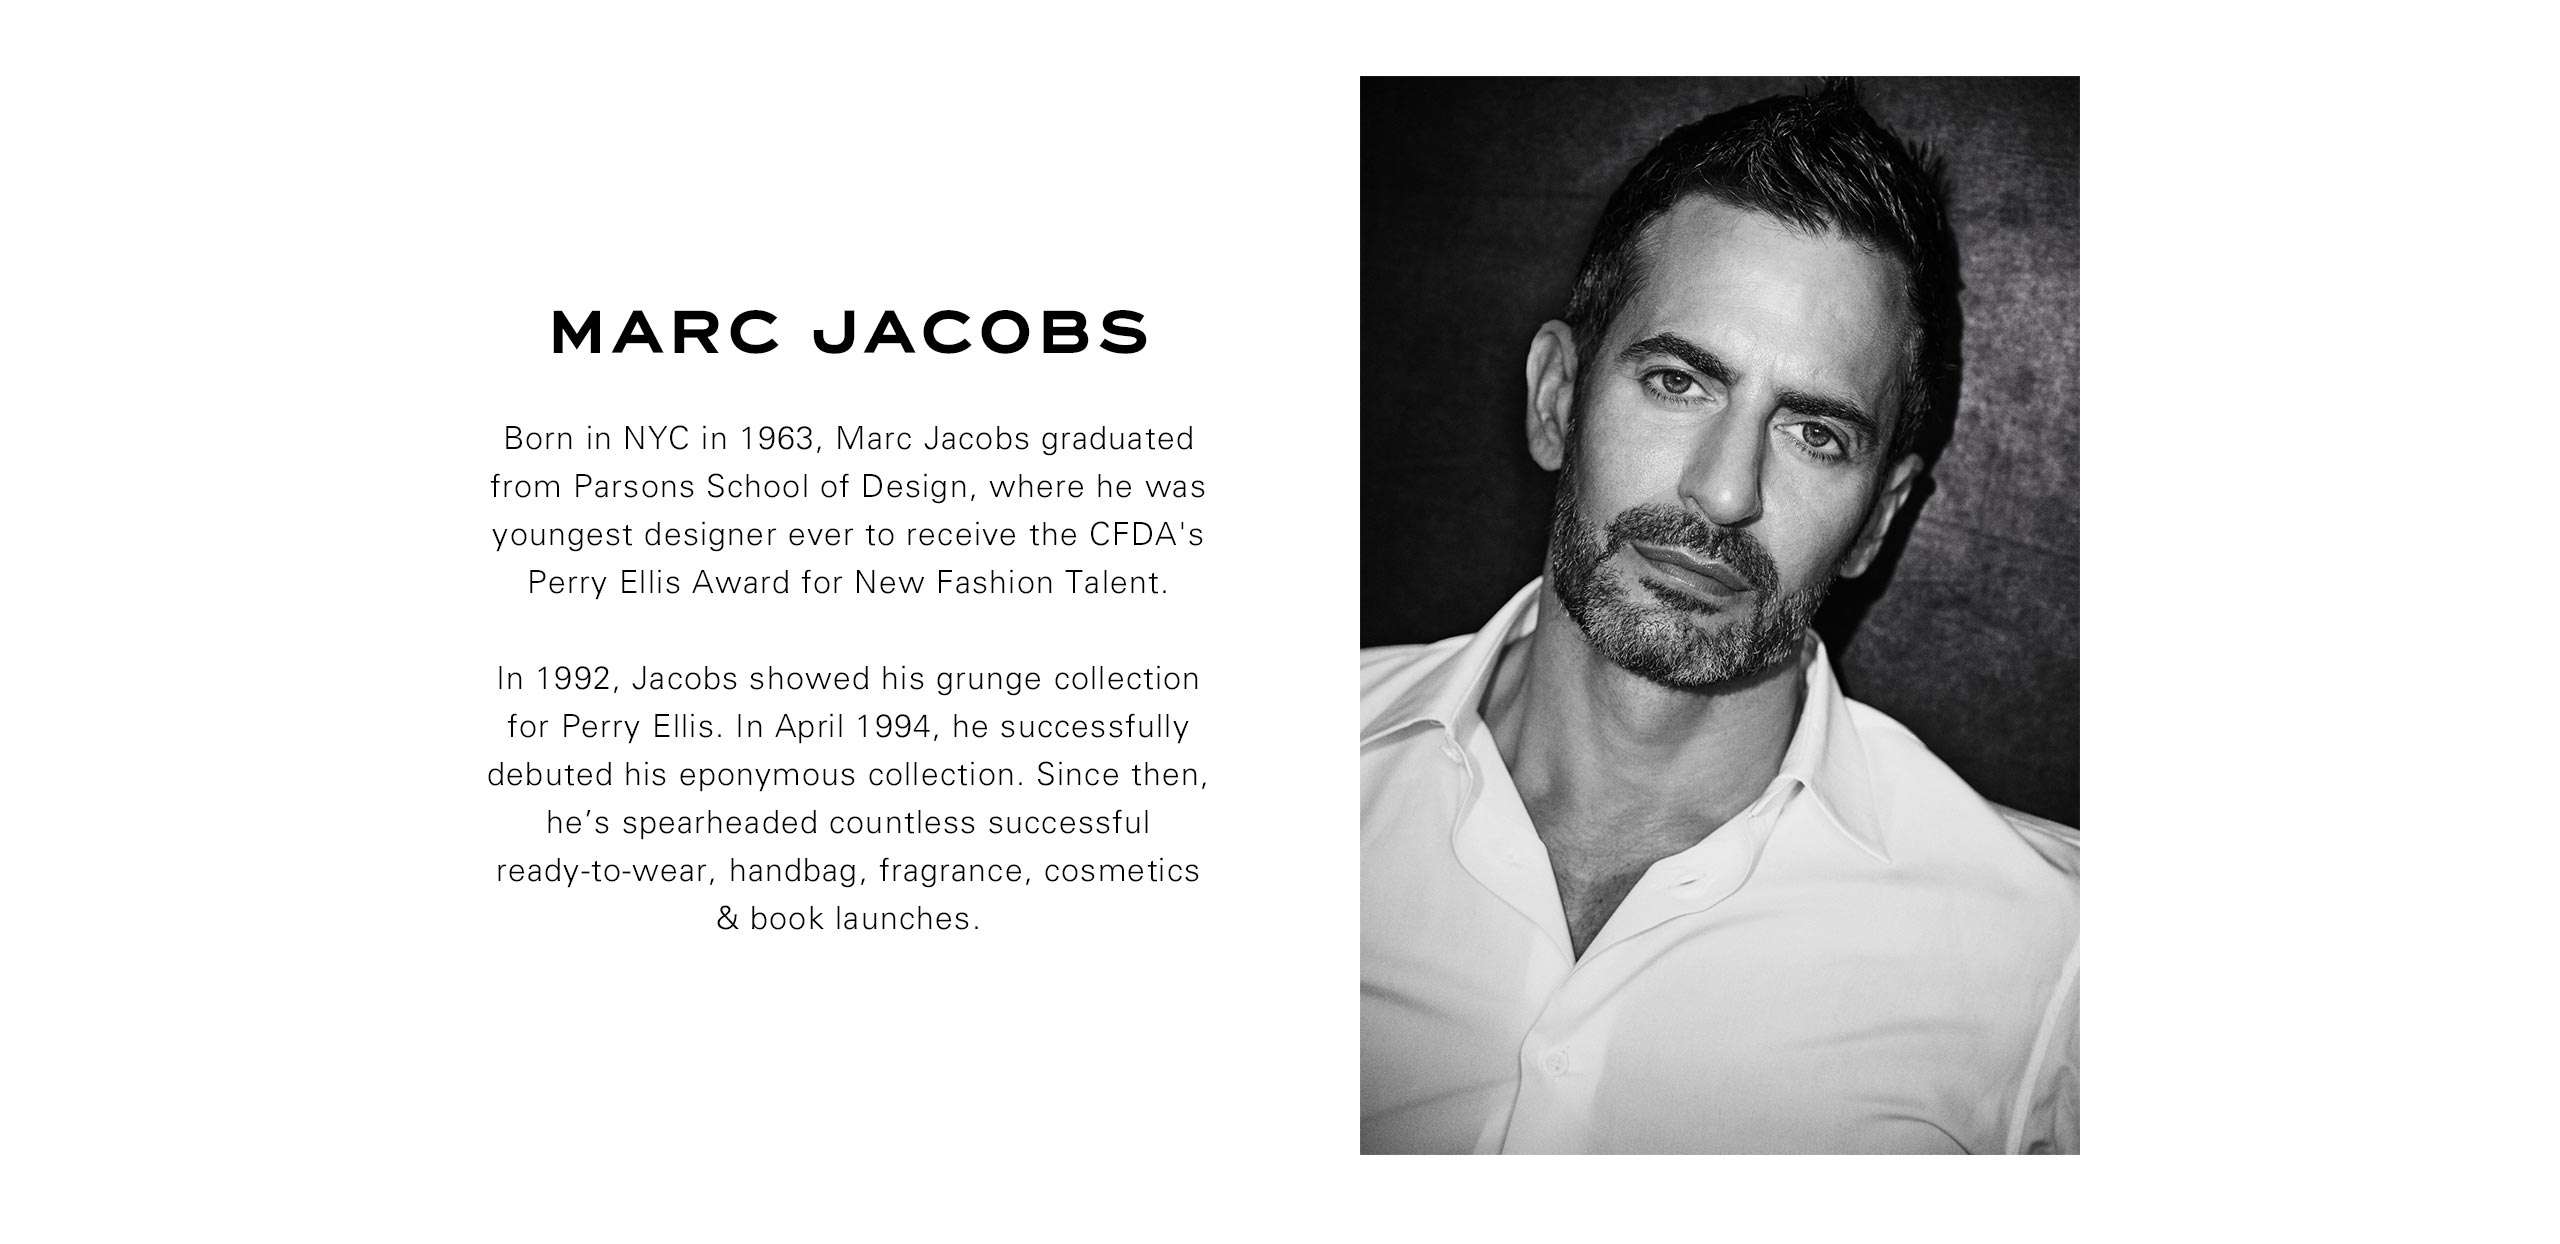 1Marc Jacobs. Born in NYC in 1963, Marc Jacobs graduated from Parsons School of Design where he was youngest designer ever to receive the CFDA's Perry Ellis Award for New Fashion Talent. In 1992, Jacobs showed his grunge collection for Perry Ellis. In April 1994, he successfully debuted his eponymous collection. Since then, he’s spearheaded countless successful ready-to-wear, handbag, fragrance, cosmetics and book launches.
